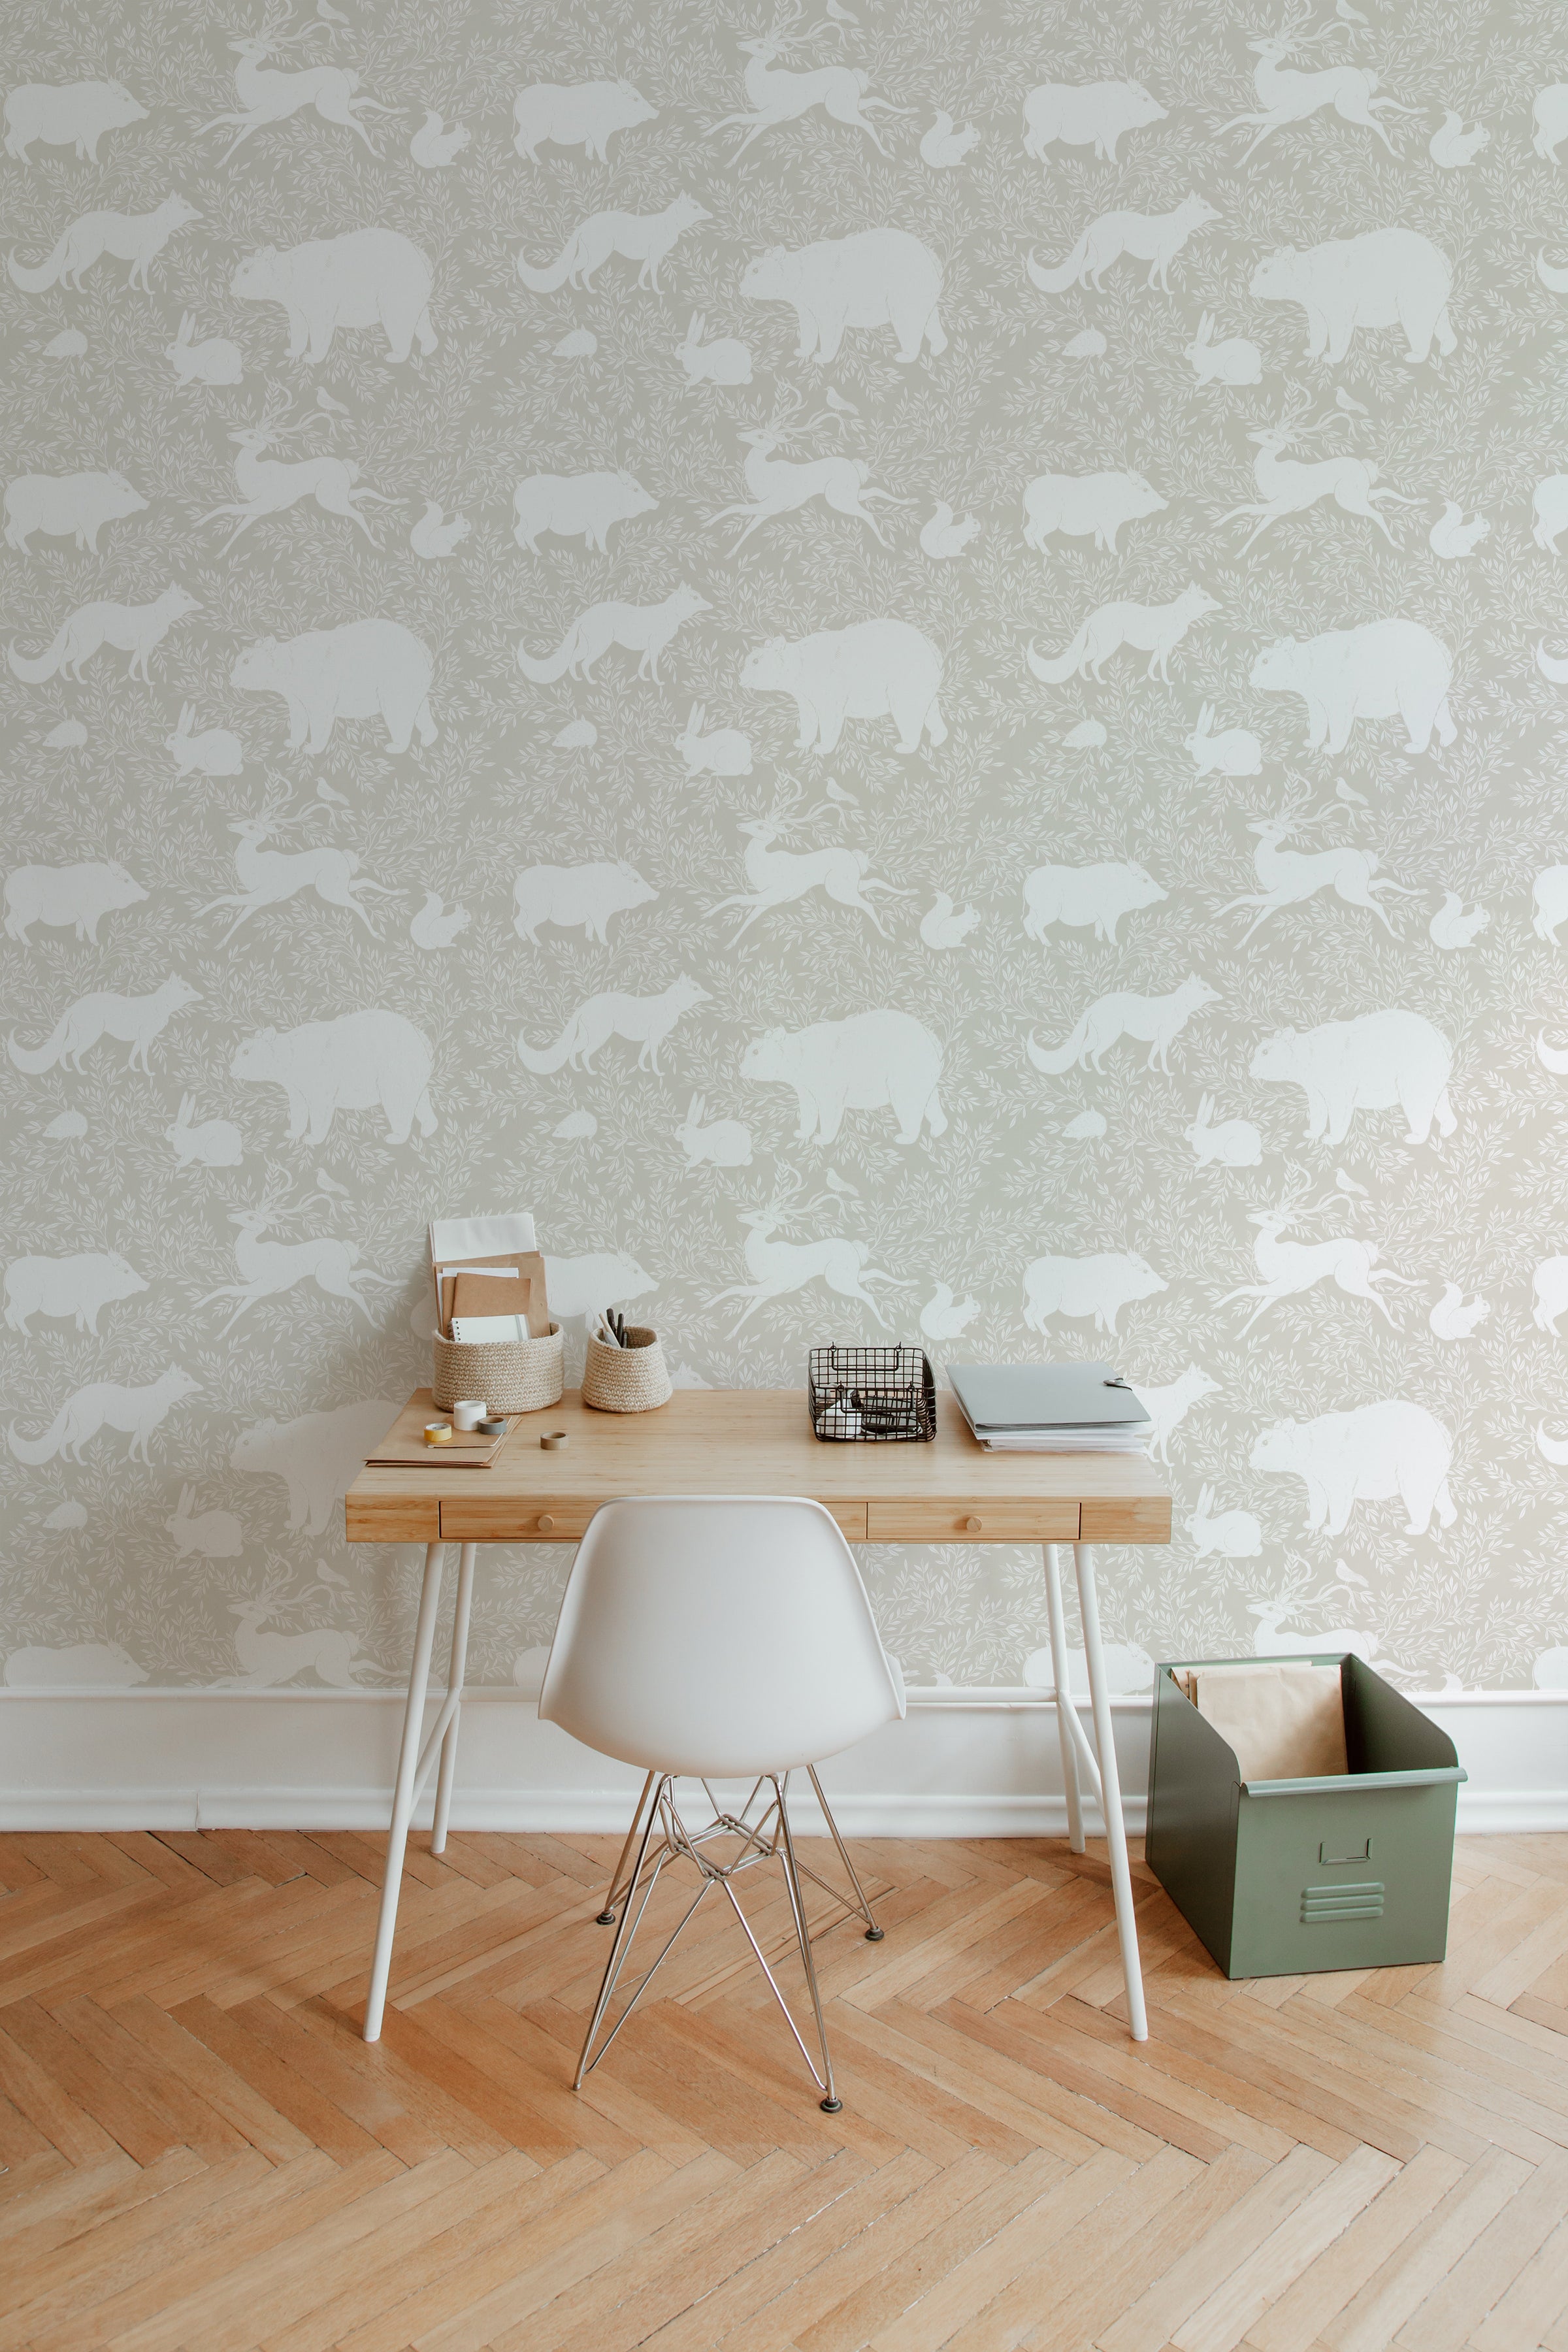 A cozy room with a wooden chair, soft toys, and a hanging coat in front of a warm beige wallpaper featuring white woodland animals such as bears, foxes, and rabbits, evoking a serene and natural atmosphere.